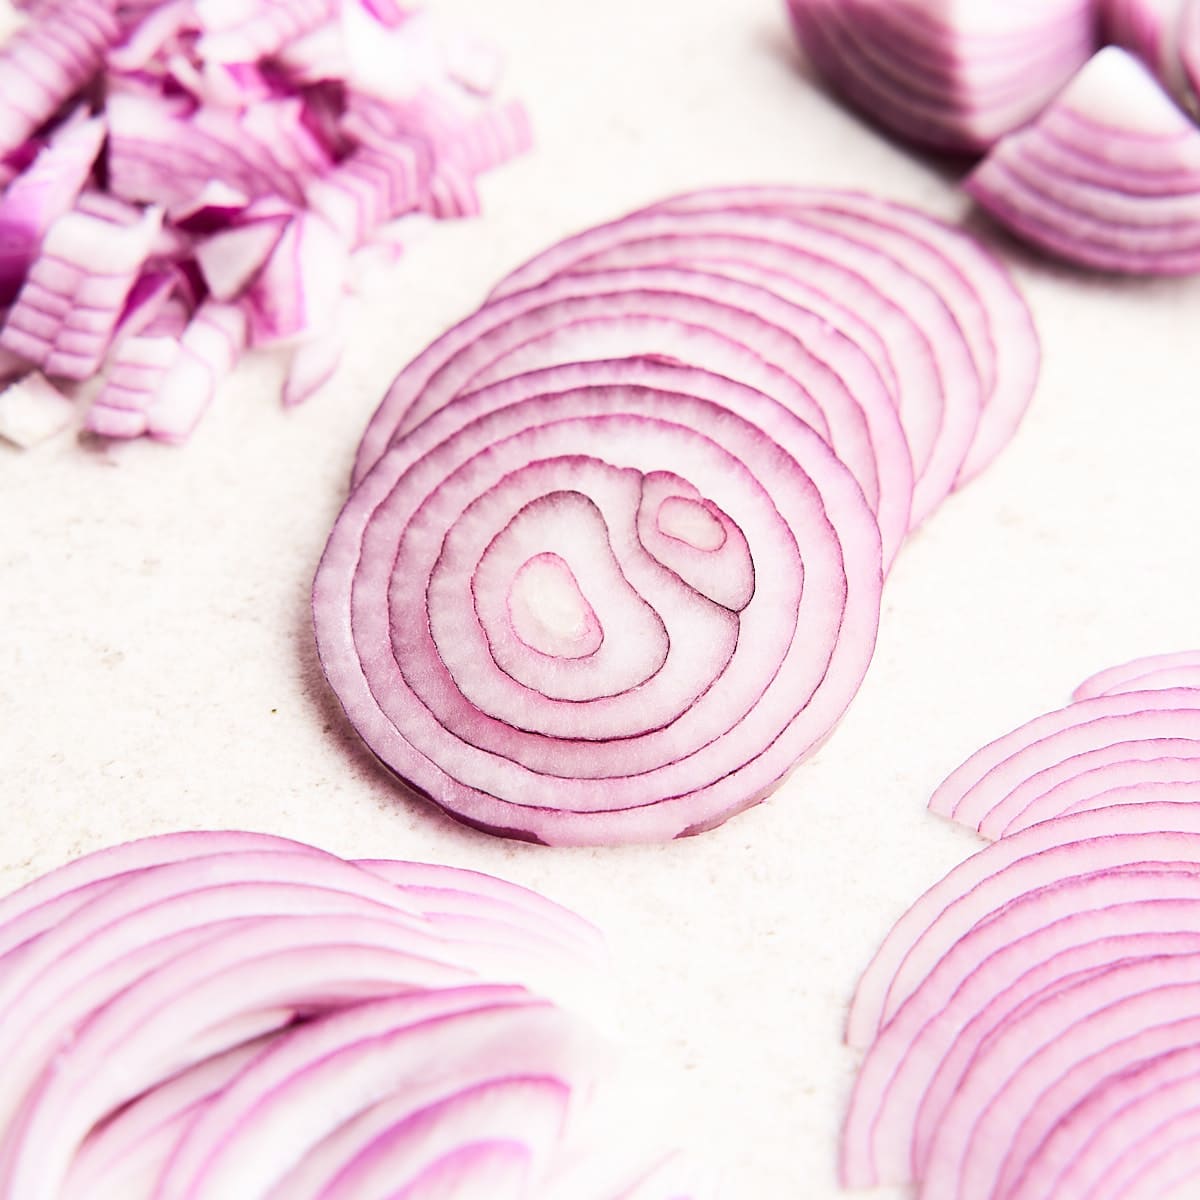 How To Chop An Onion (Sliced, Diced, & Rings)